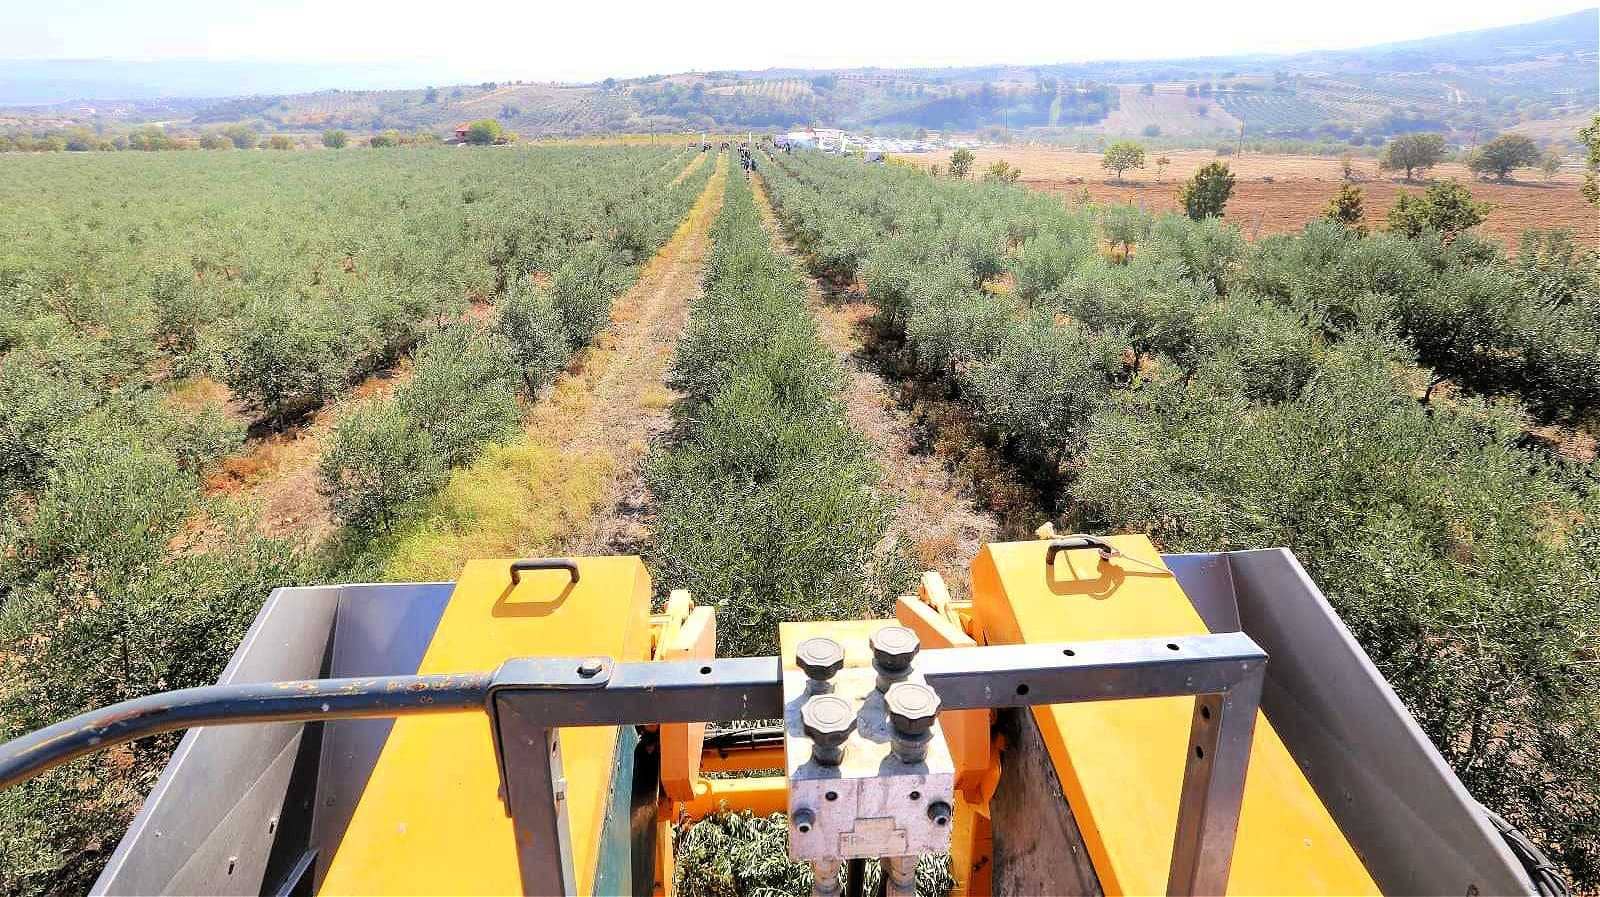 africa-middle-east-profiles-the-best-olive-oils-competitions-turkish-olive-oils-win-acclaim-in-world-competition-olive-oil-times